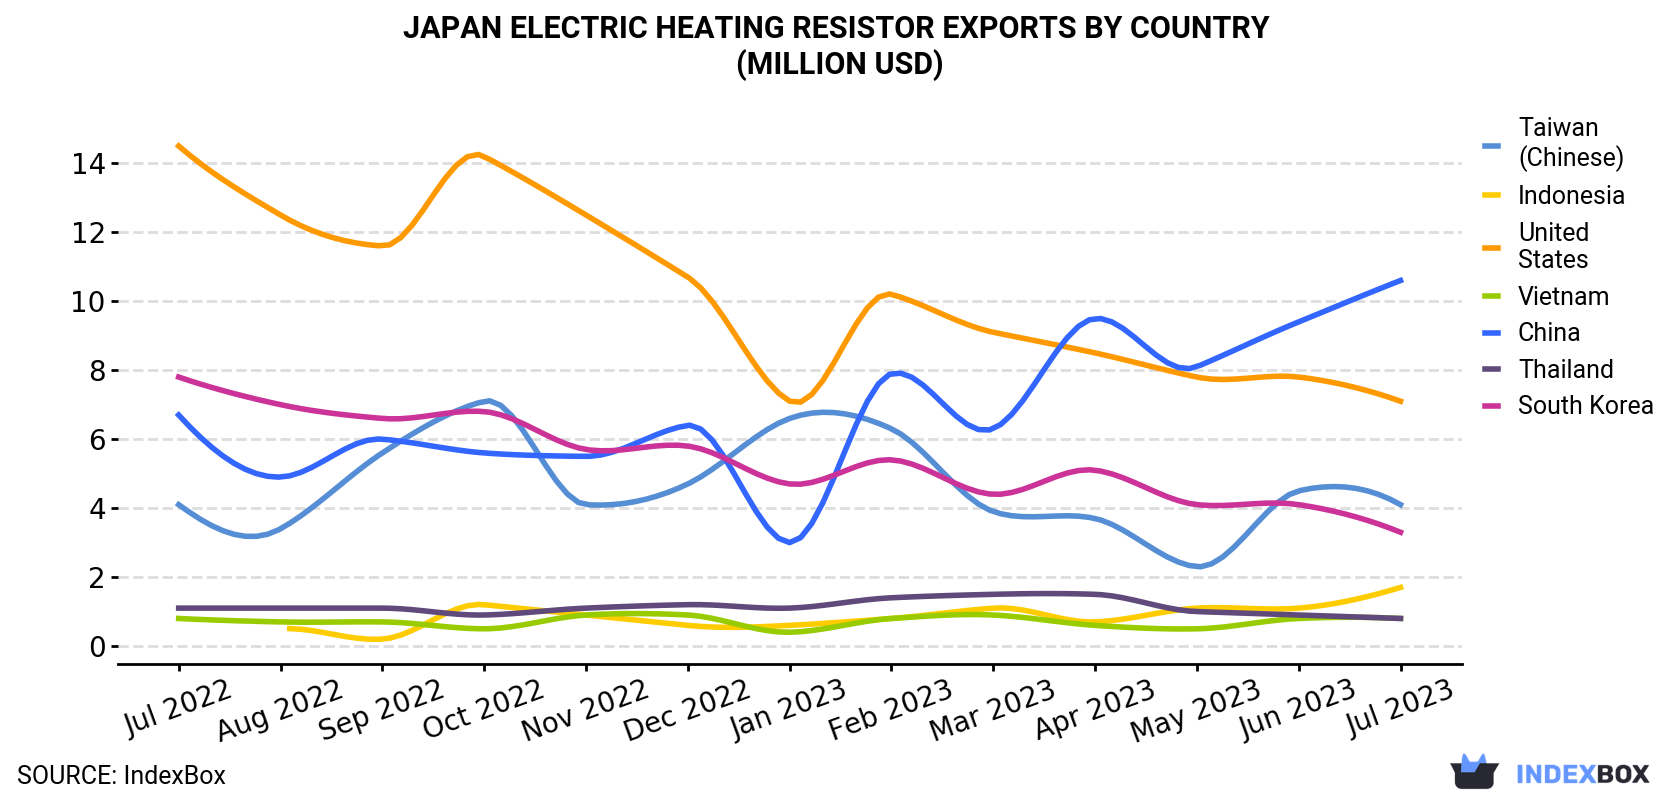 Japan Electric Heating Resistor Exports By Country (Million USD)